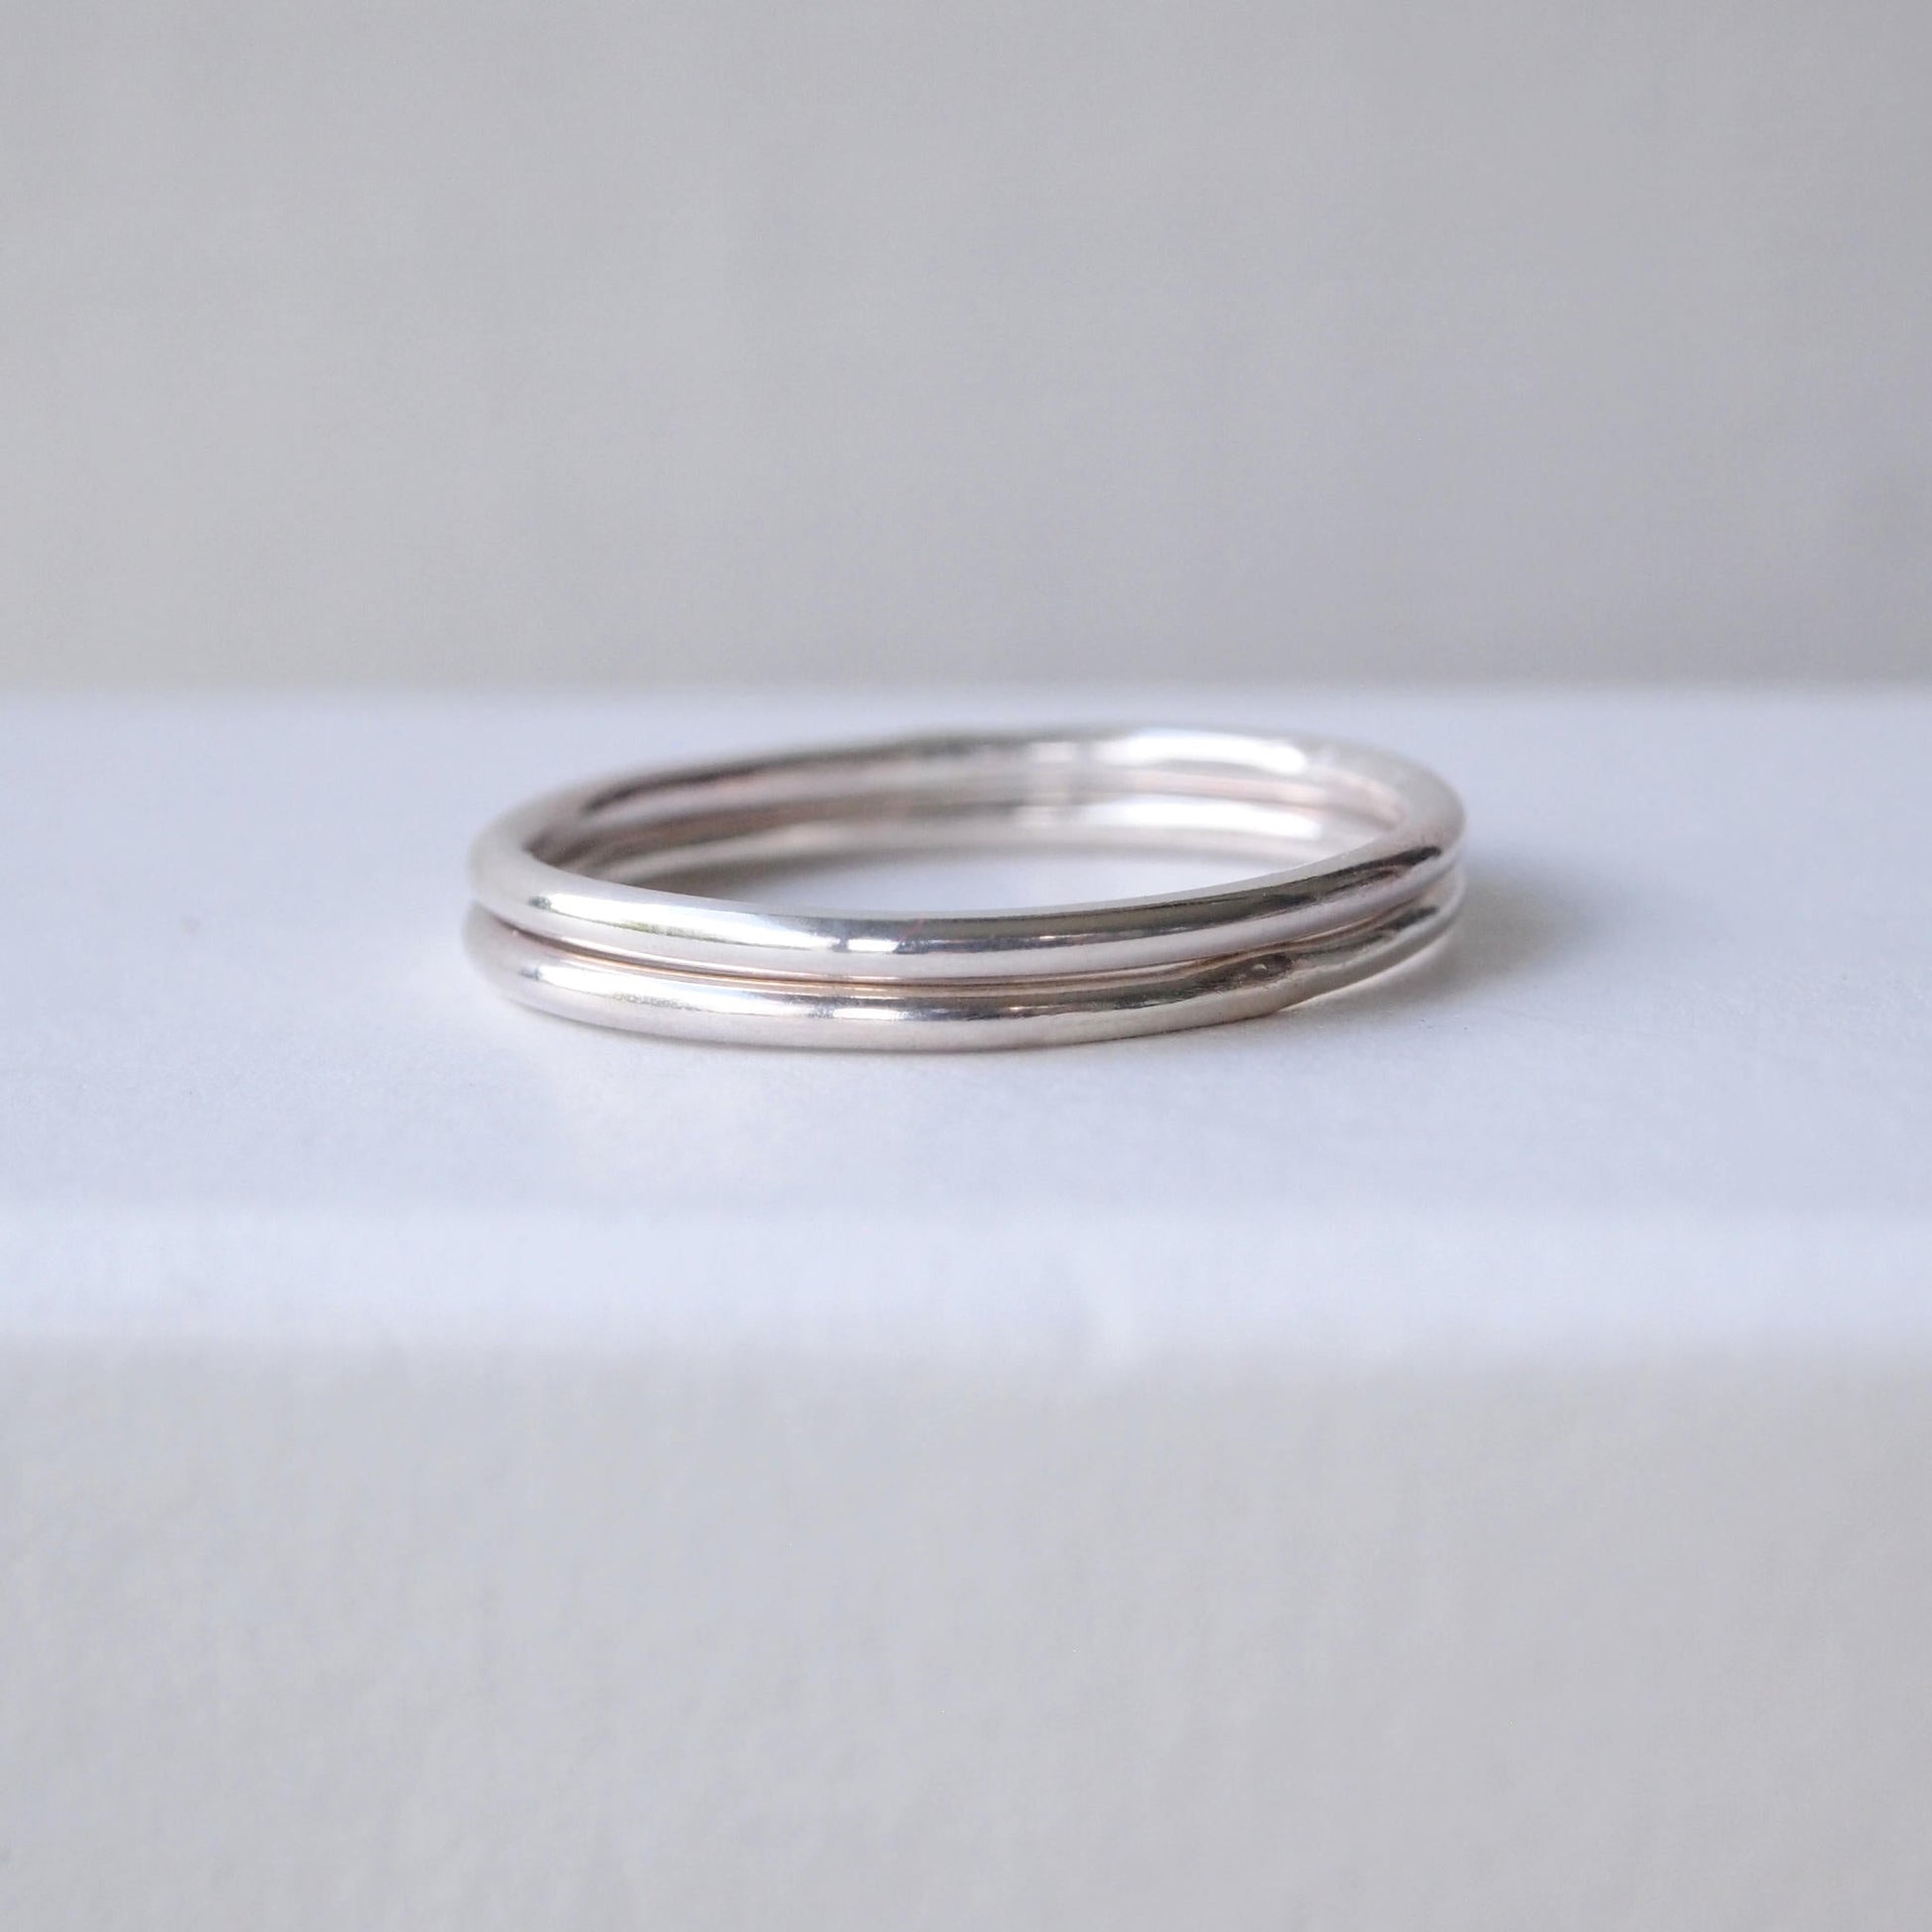 Two Plain round profile wedding plain band with no details. minimalist sterling Silver ring. Handmade to your ring size by maram jewellery in Edinburgh UK